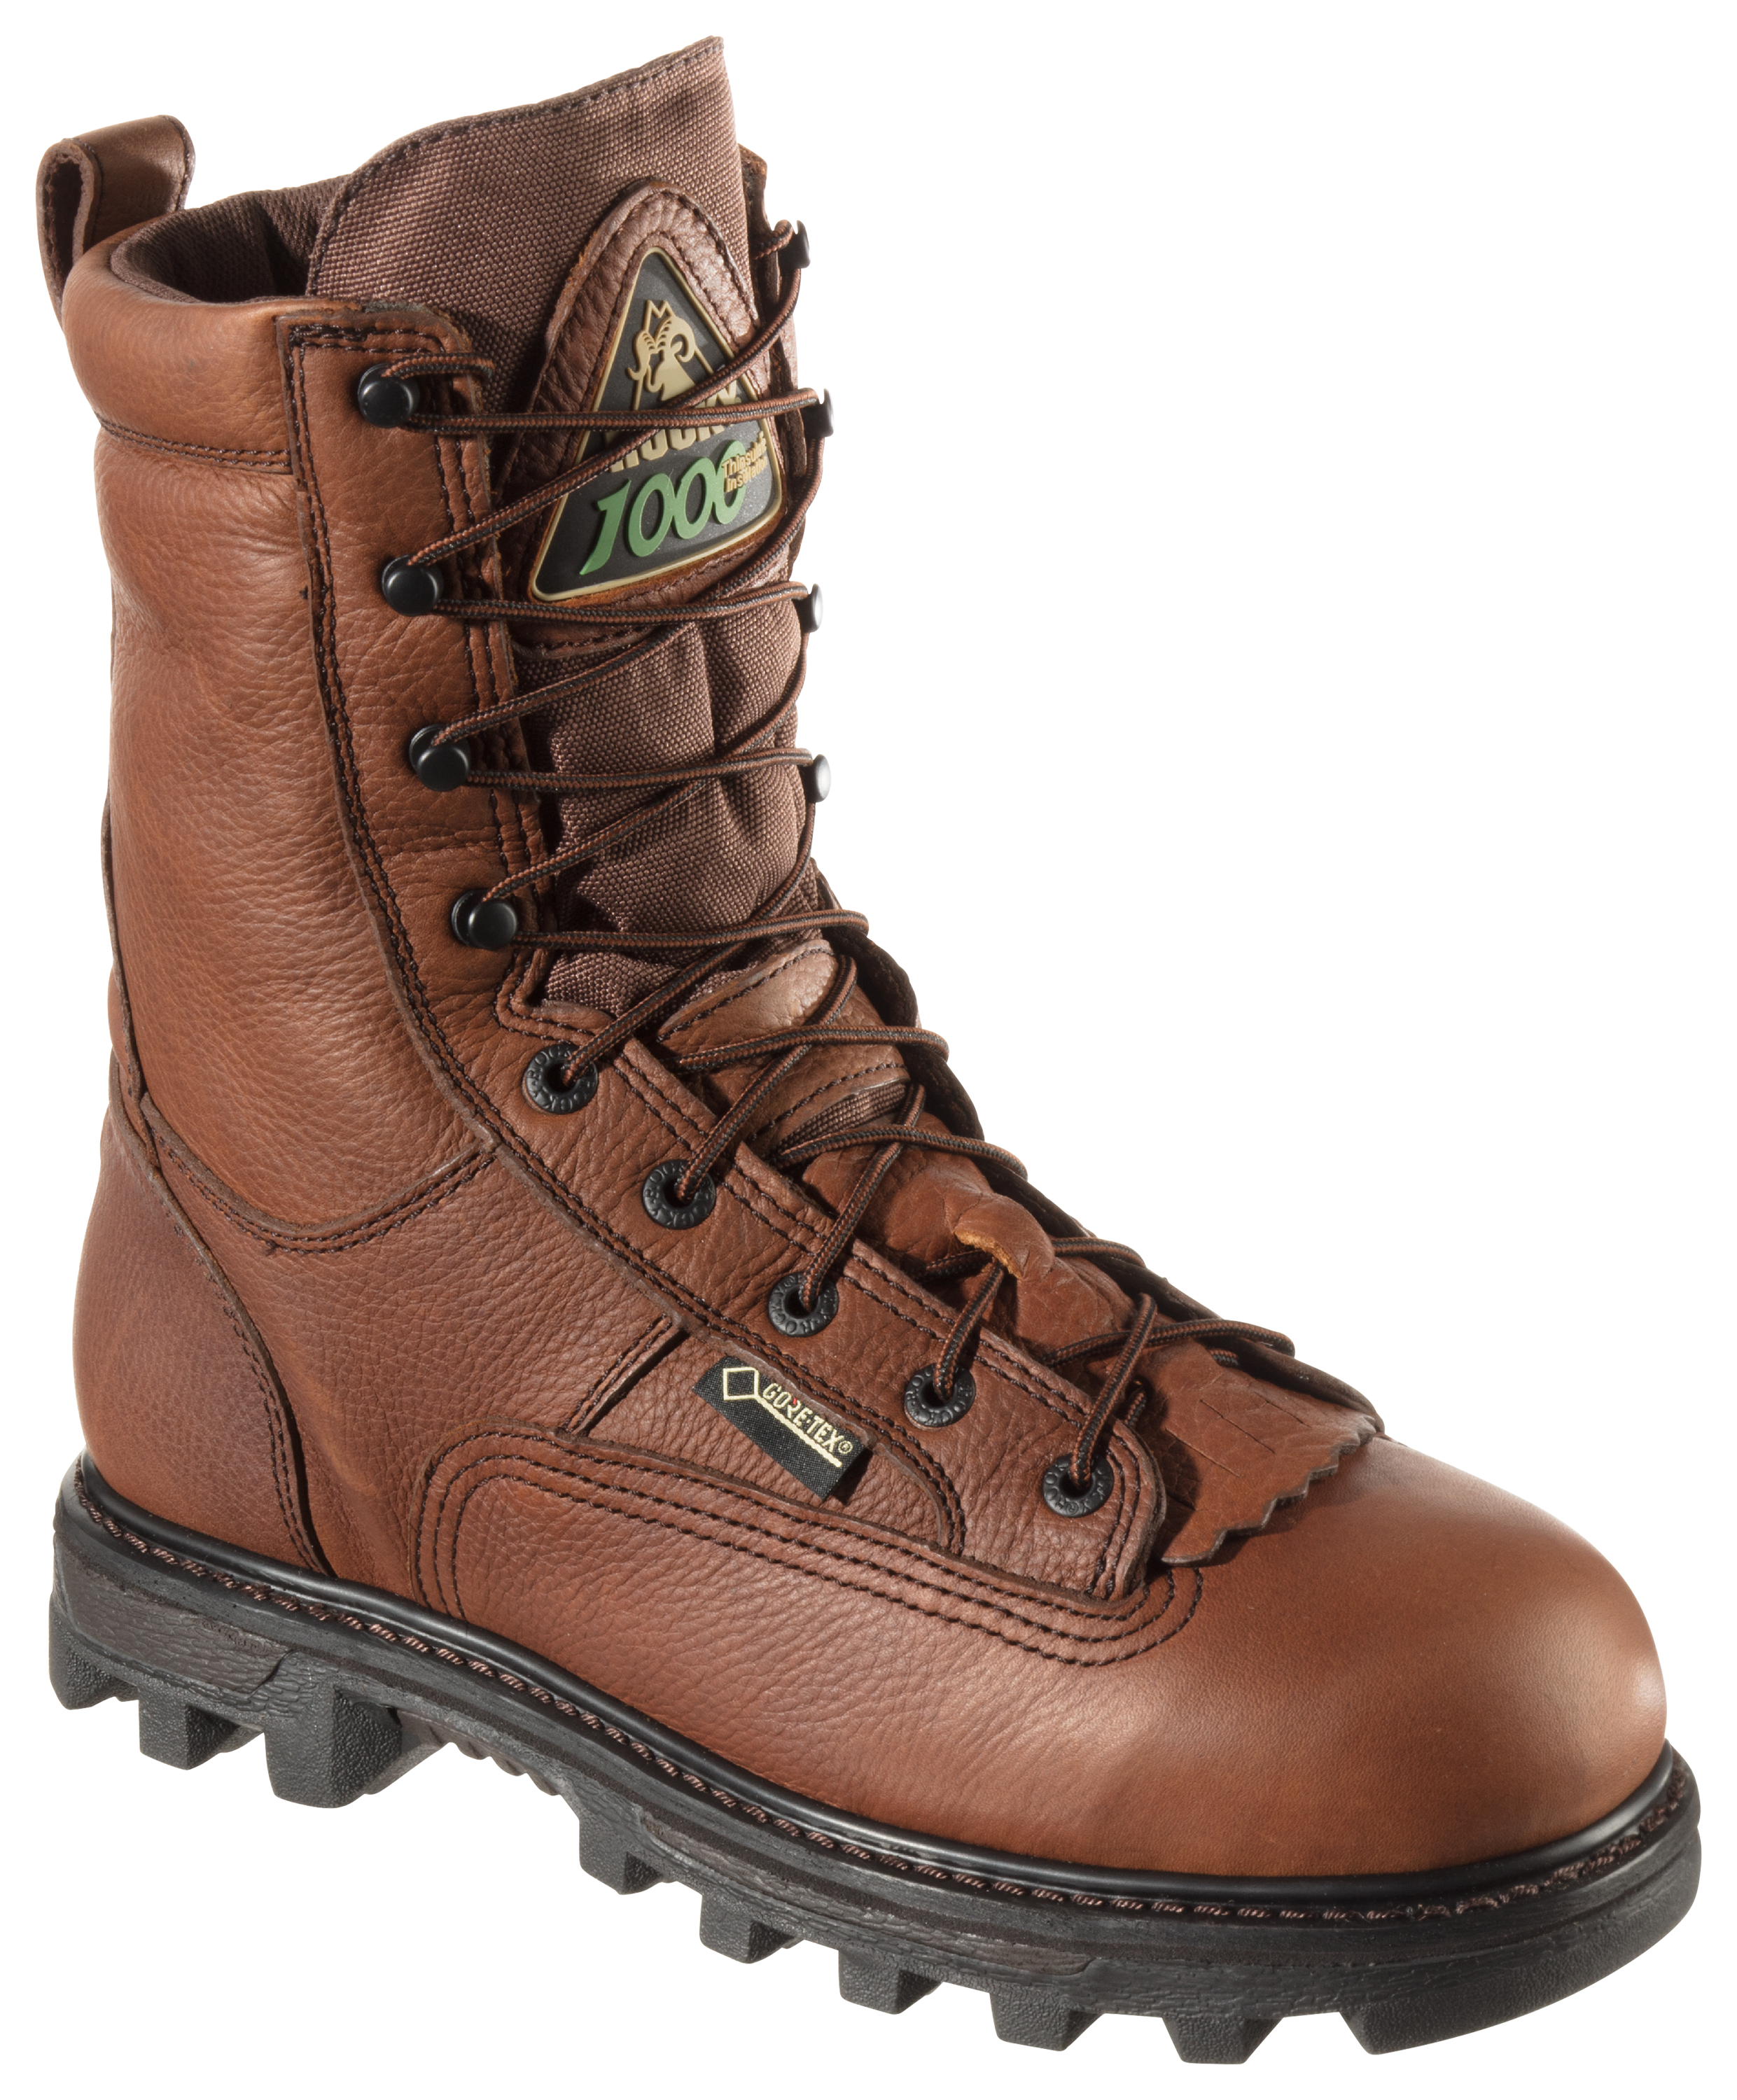 ROCKY BearClaw 3D GORE-TEX 1,000-Gram Insulated Hunting Boots for Men - Brown - 11.5W